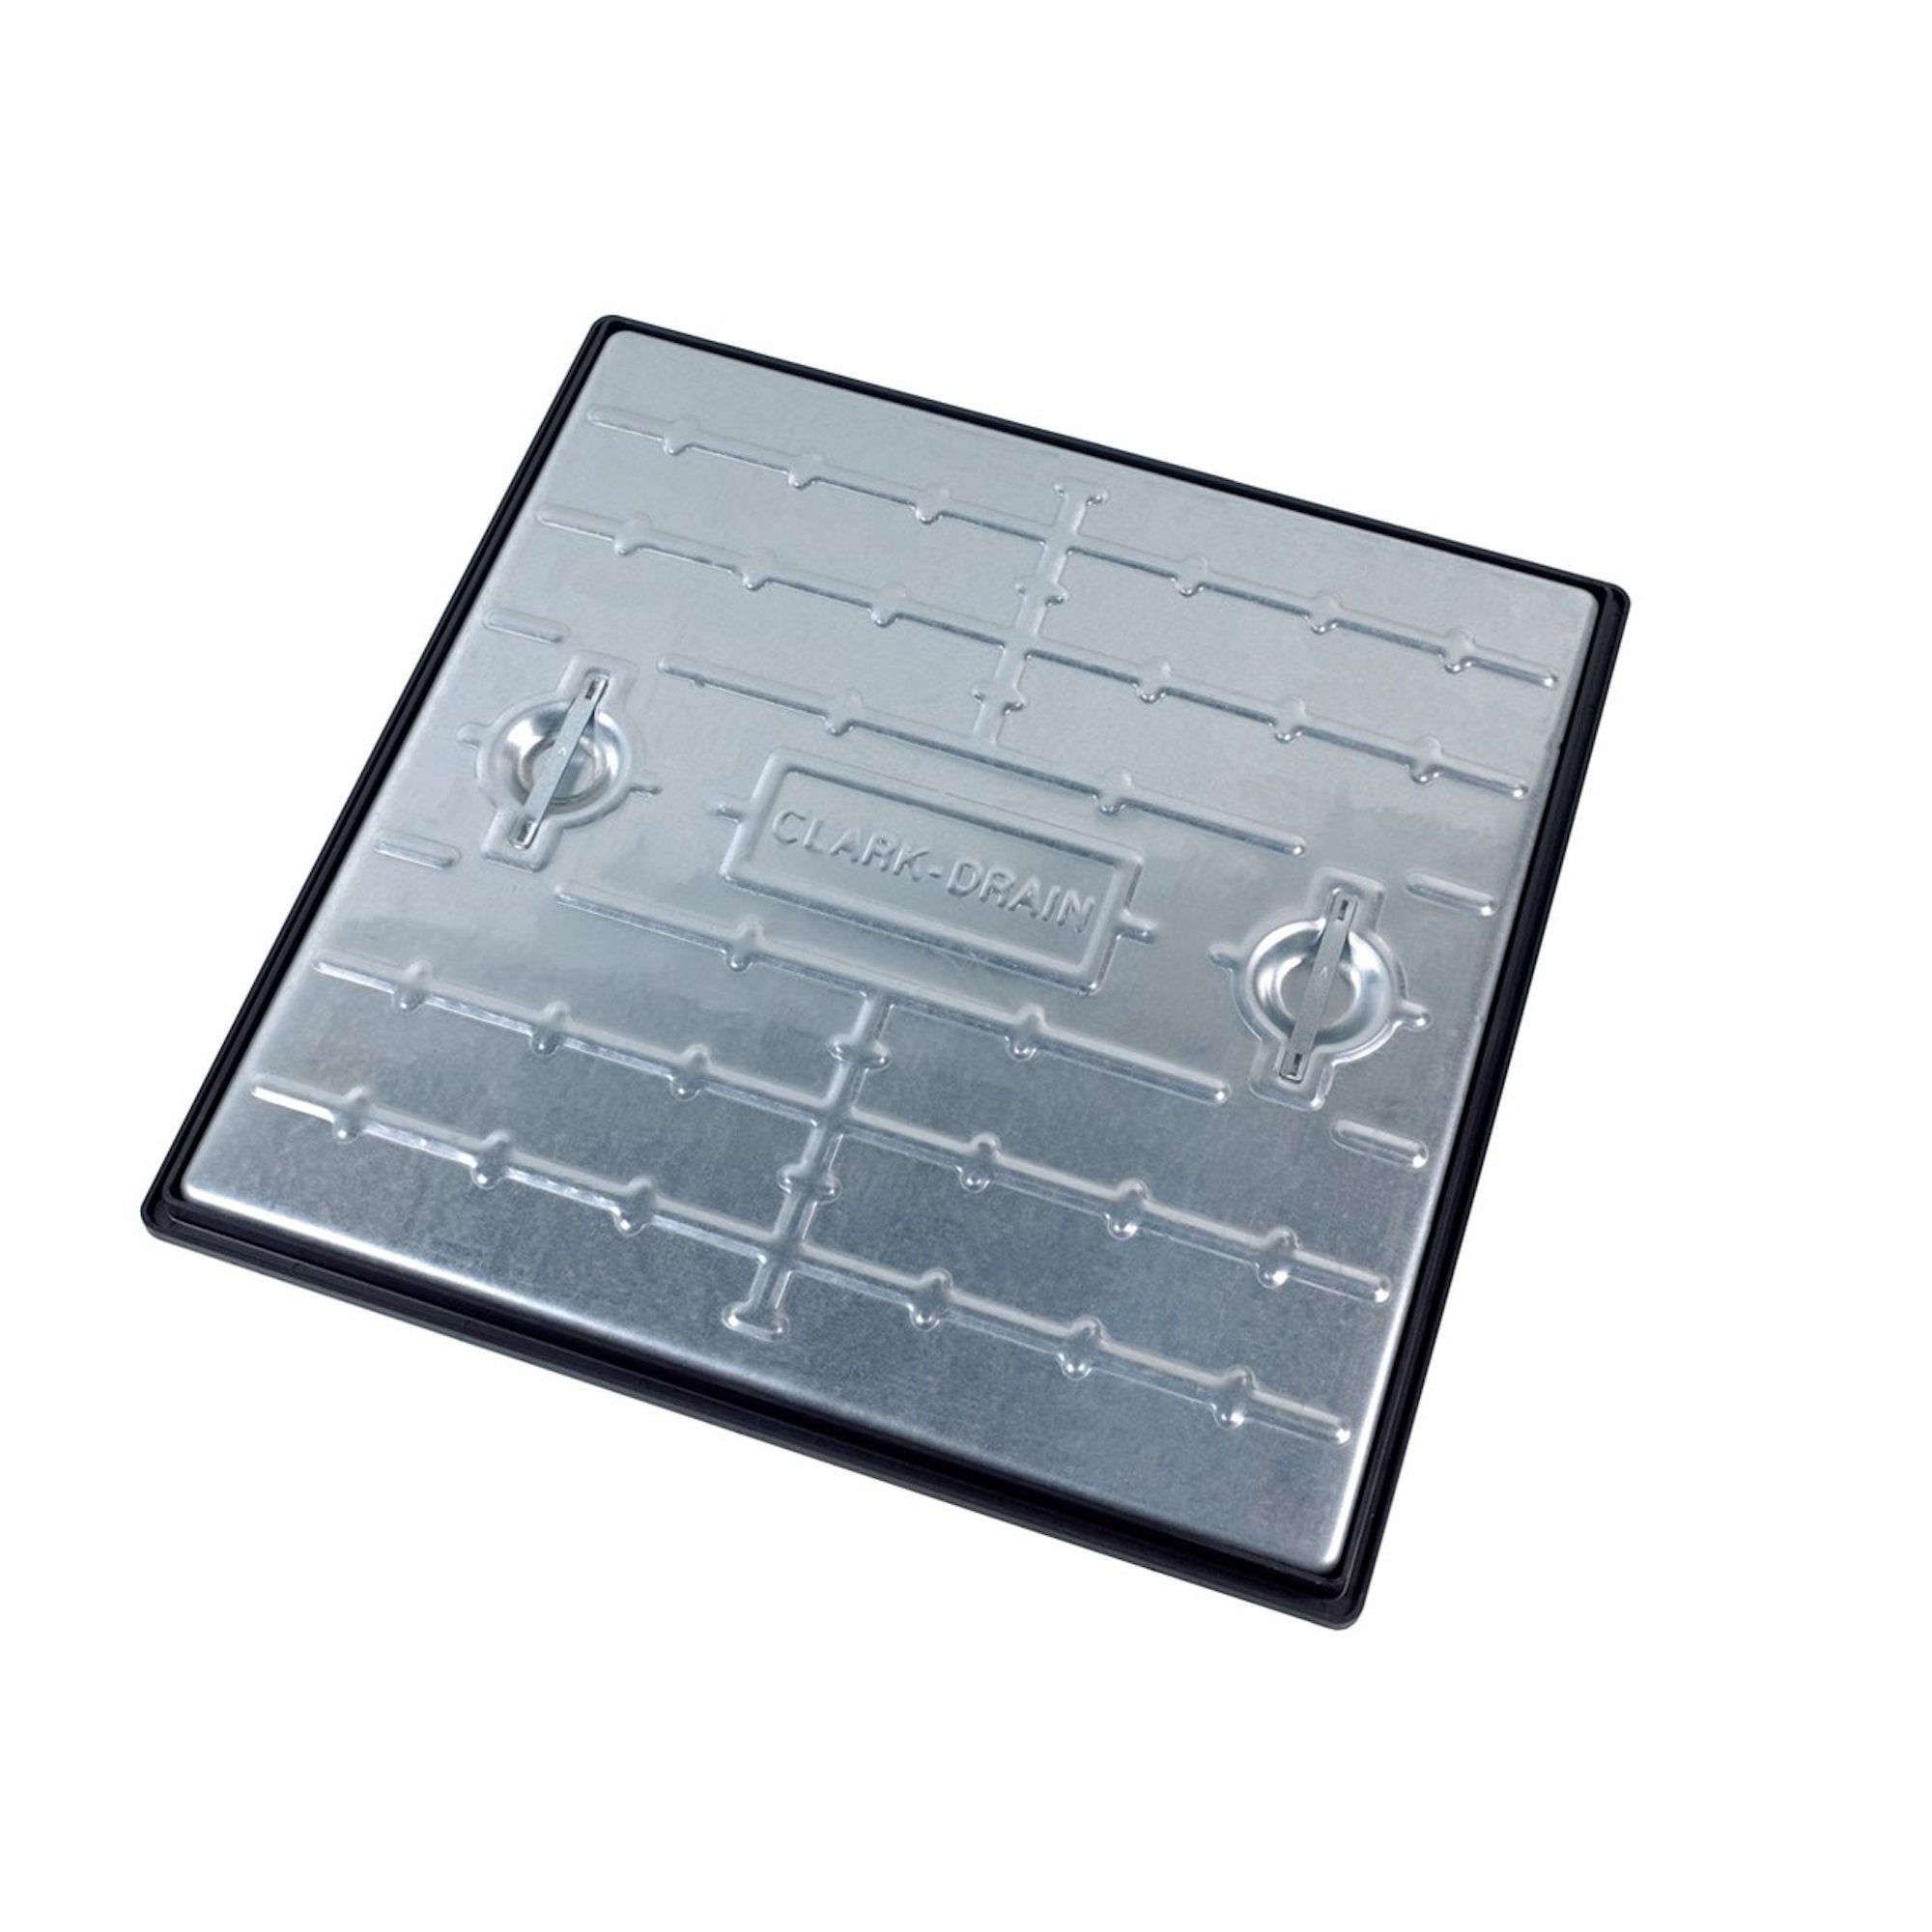 Clark-Drain Galvanised Single Seal Pedestrian Manhole Cover and Frame 600mm x 600mm - PC7AG